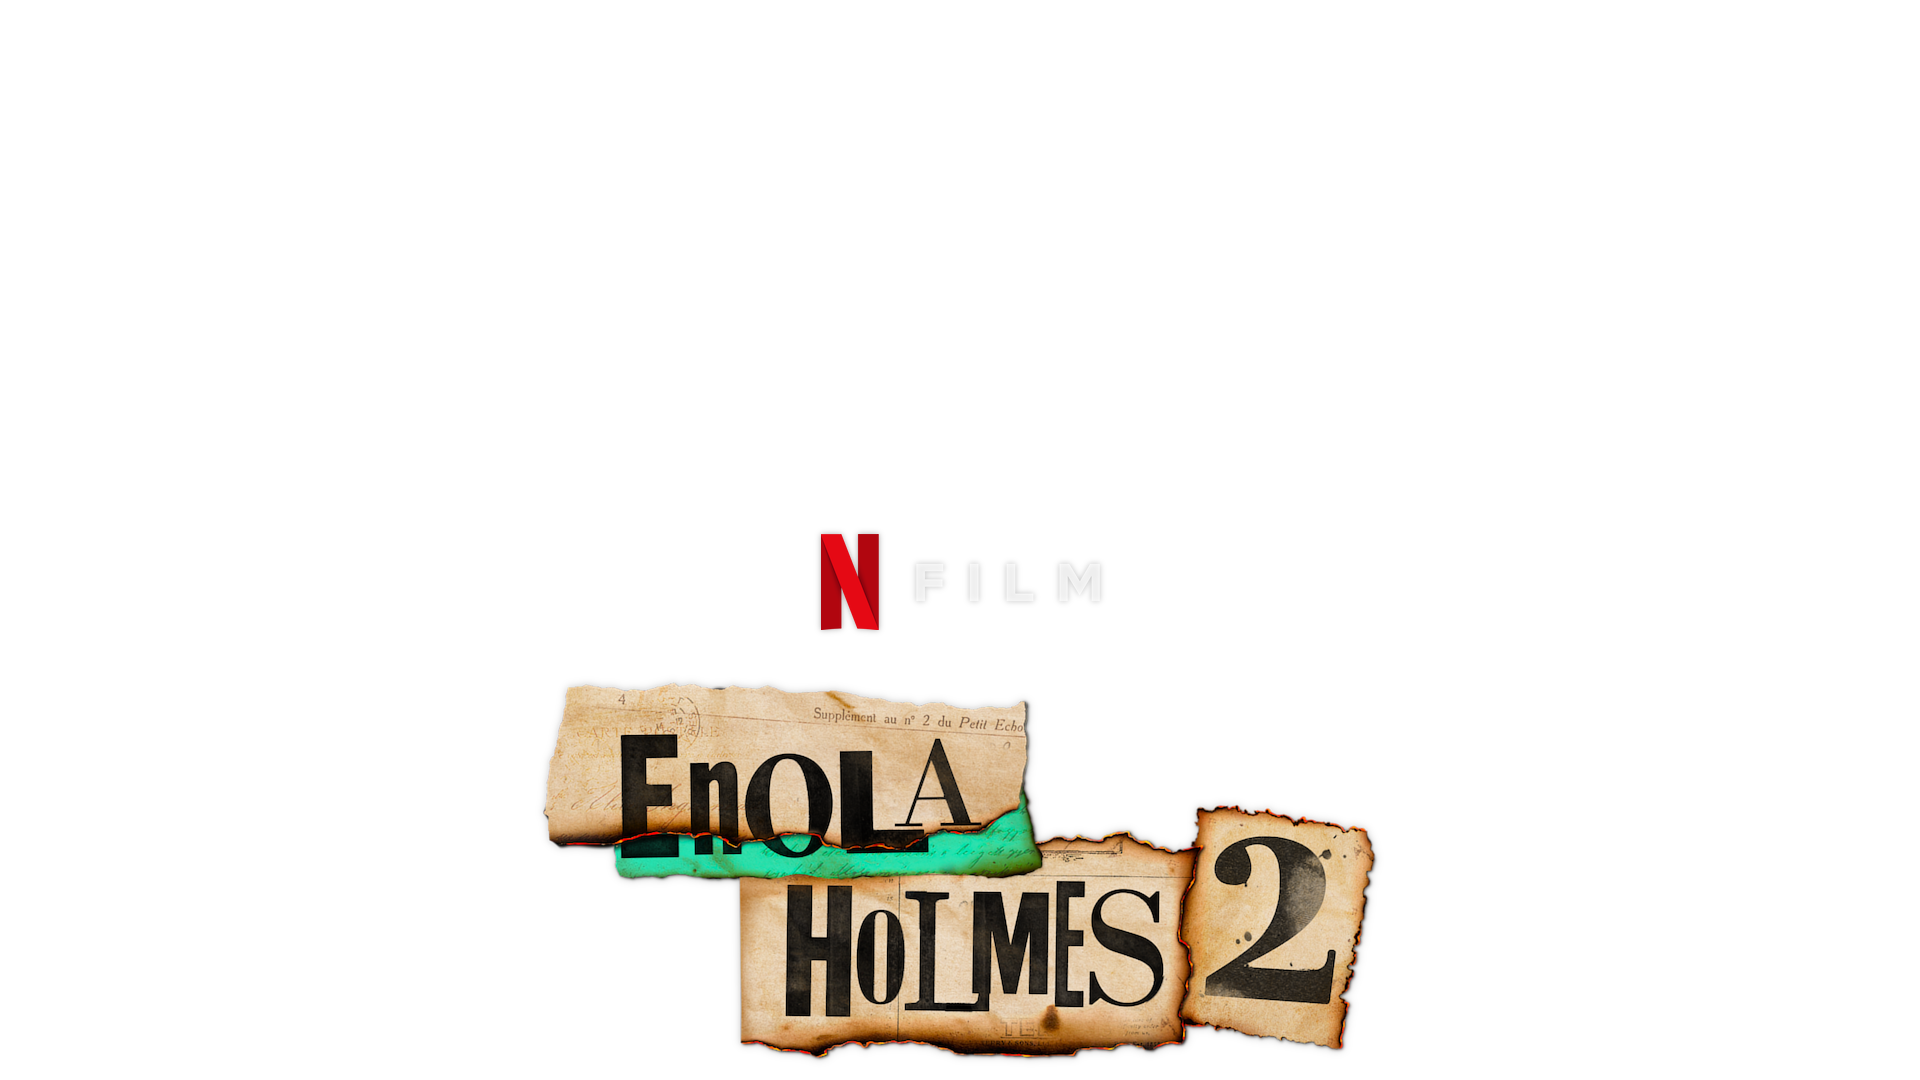 Enola Holmes 2 Cast, News, Videos and more pic